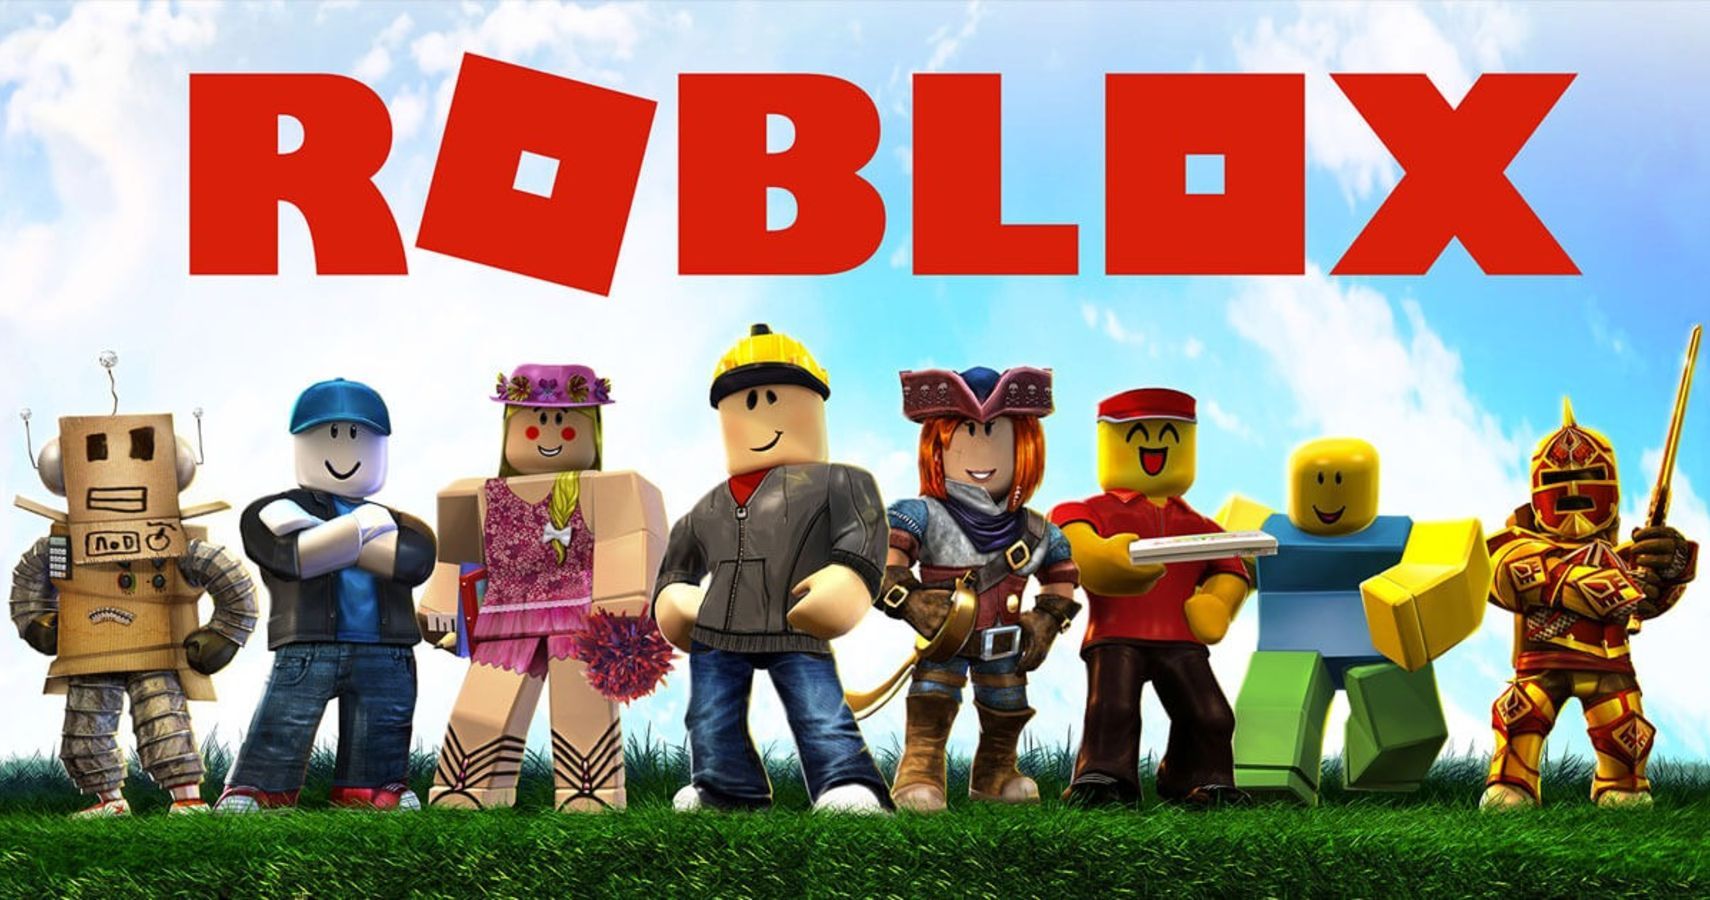 Mobile Simulation Games Made Over 2 Billion In 2020 Led By Roblox With Nearly 1 Billion - assassin sandbox roblox